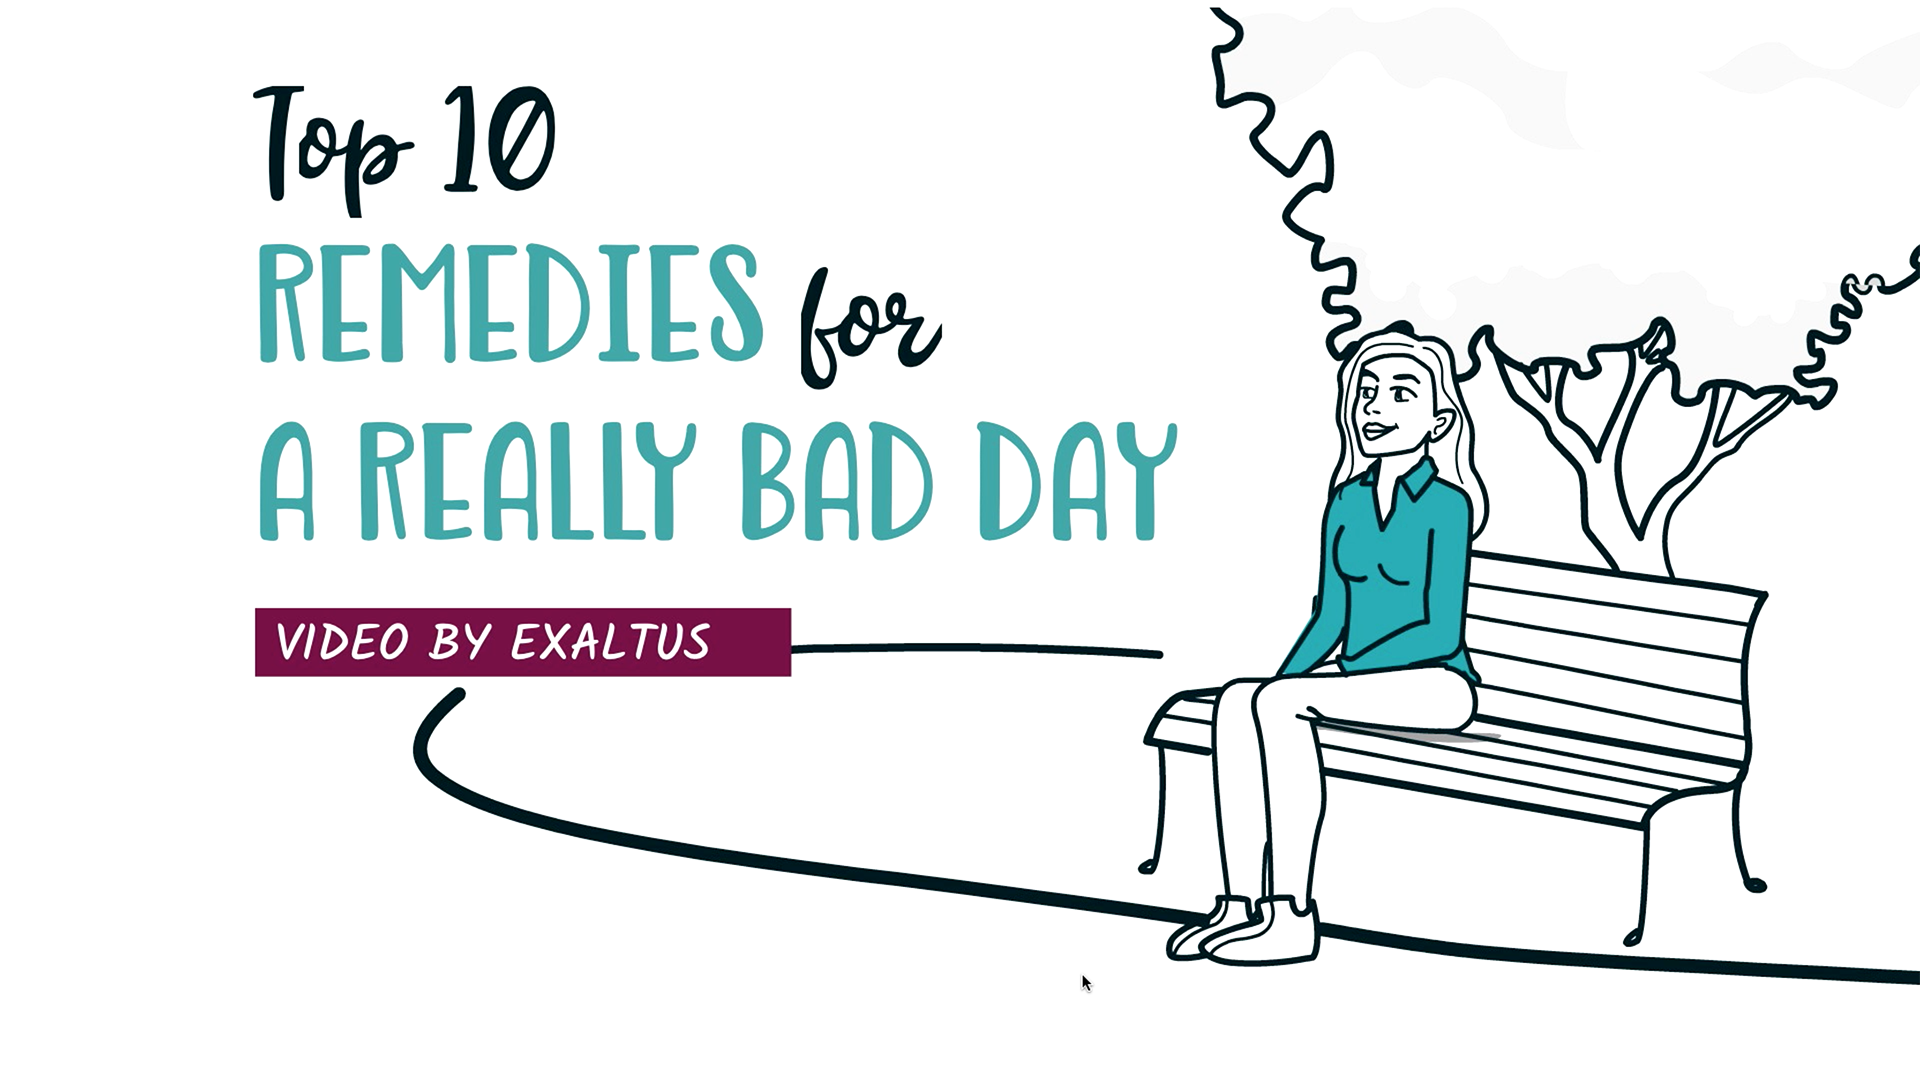 whiteboard video examples whiteboard animation examples remedies for a bad day